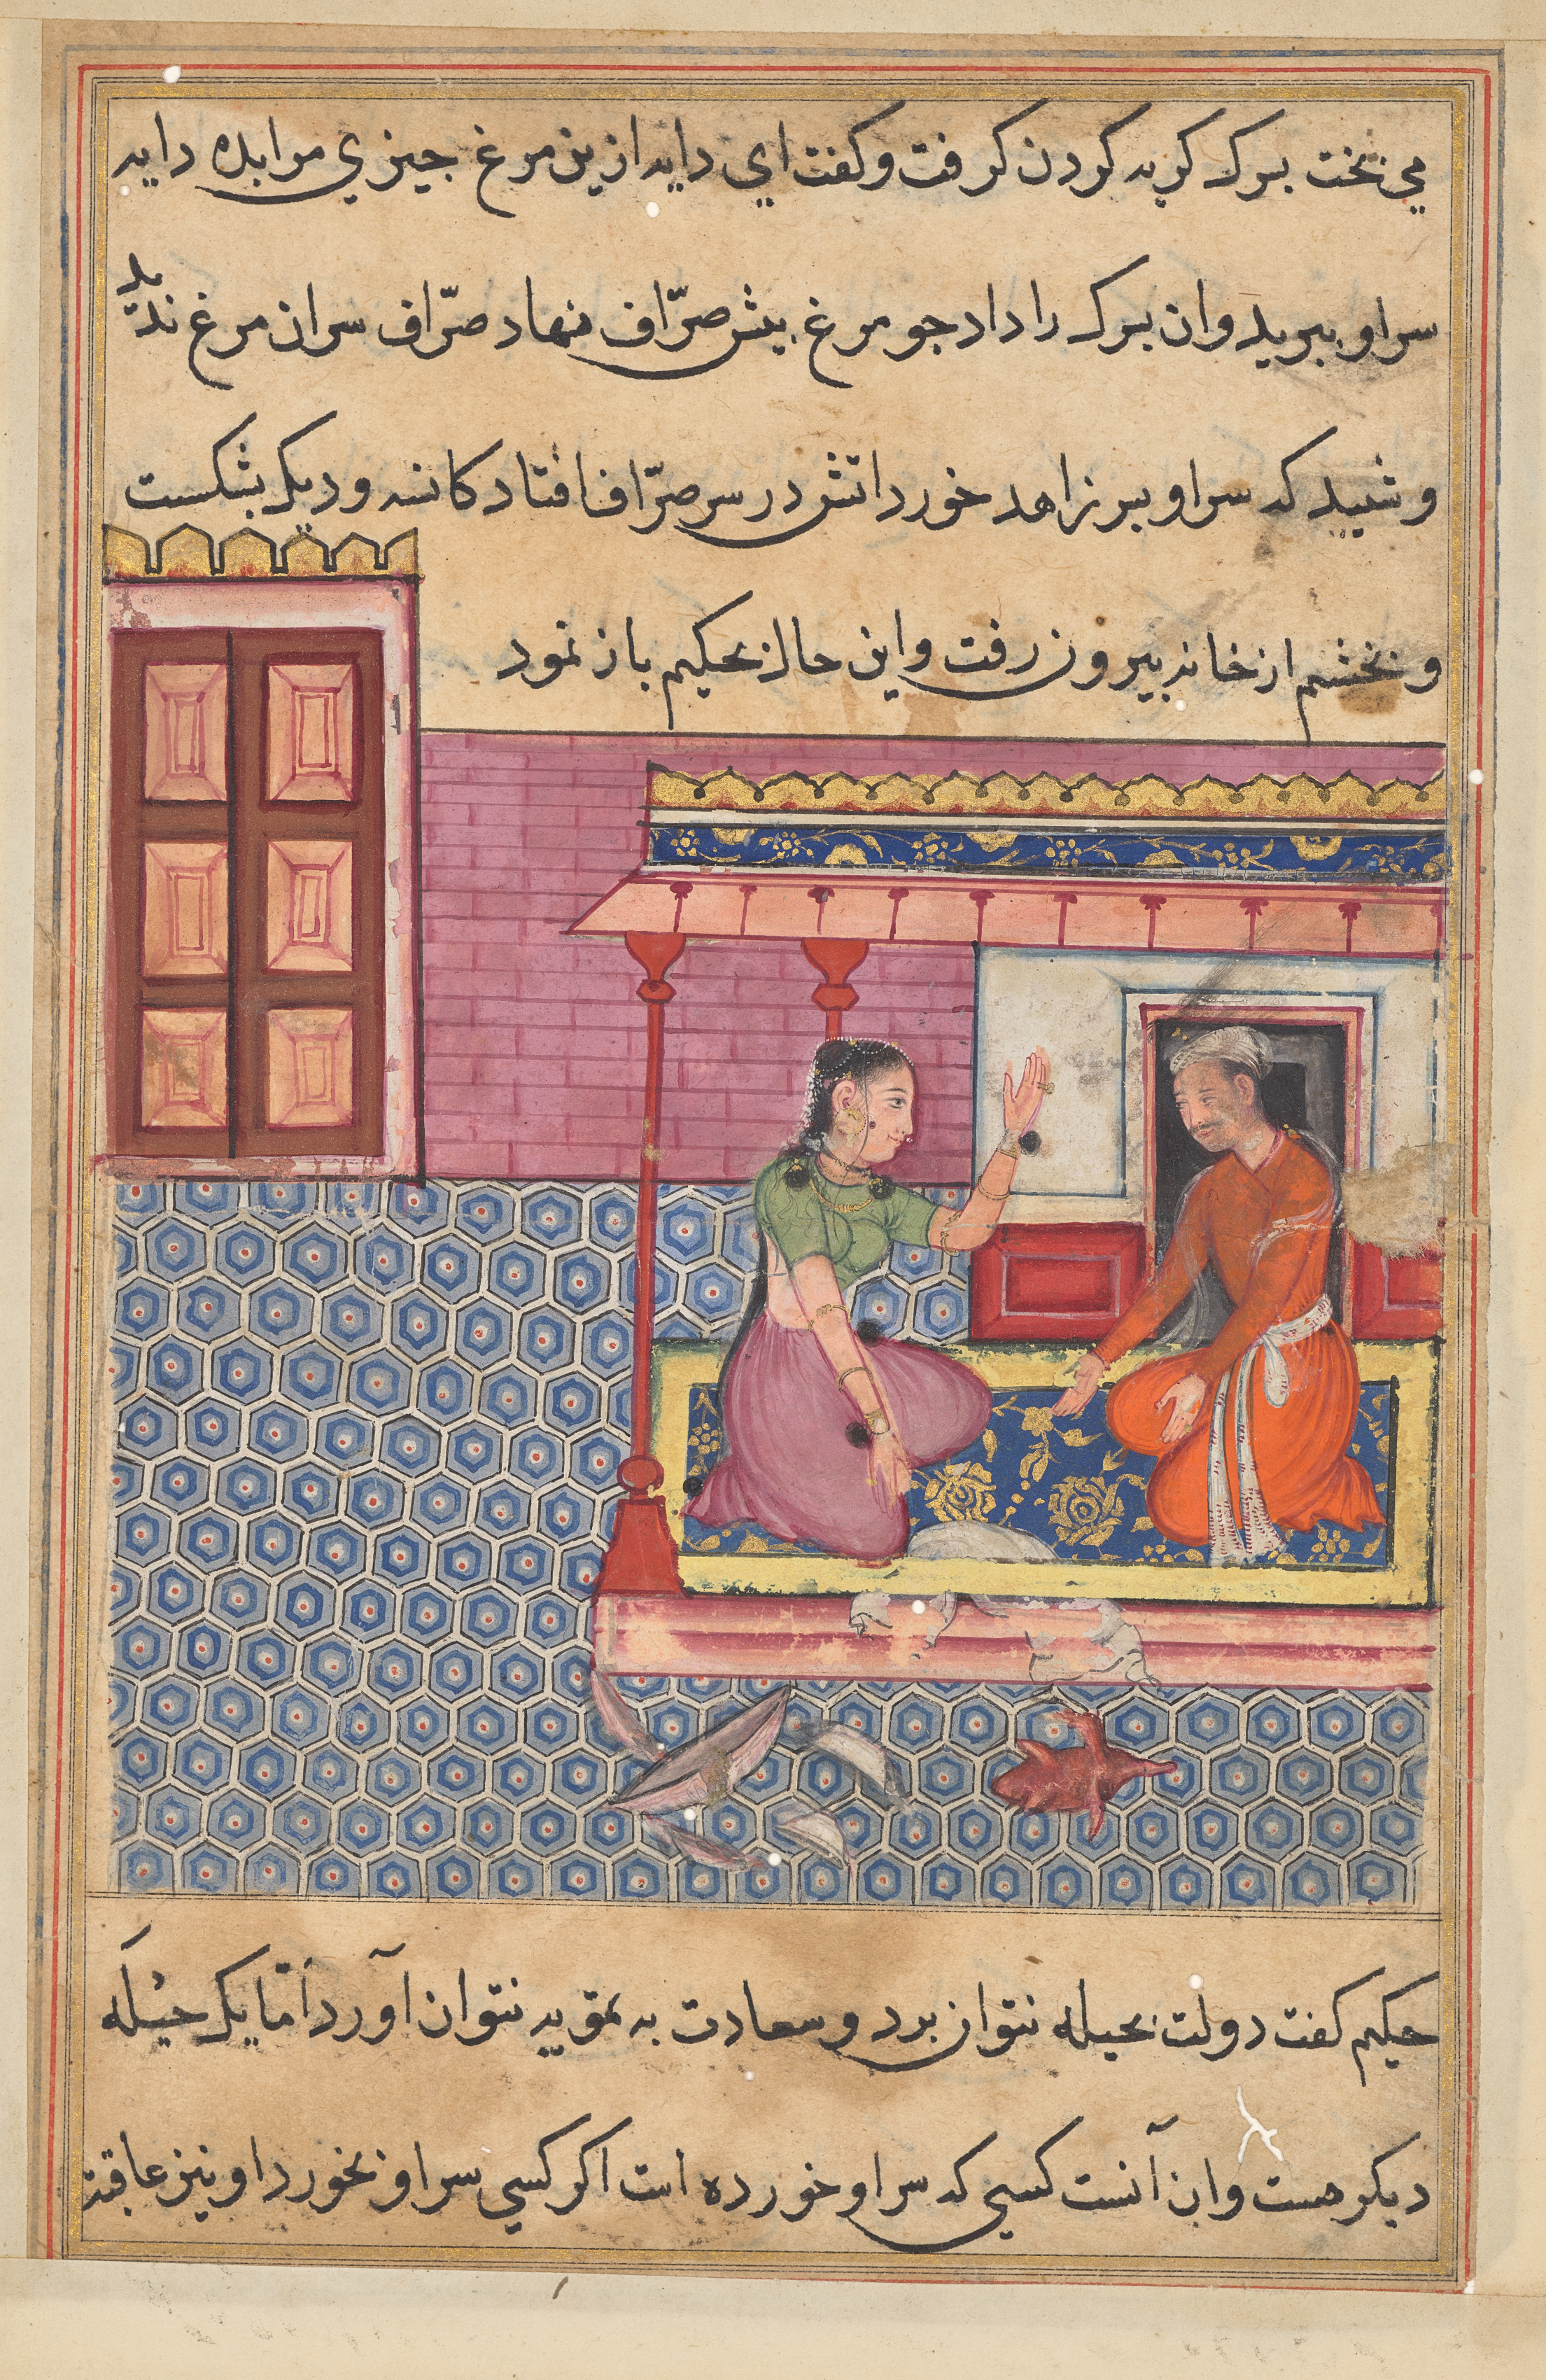 The pious man’s wife offers the seven-colored bird as food to her lover, but not finding its head, he breaks the pot and bowl in anger, from a Tuti-nama (Tales of a Parrot): Fifty-second Night